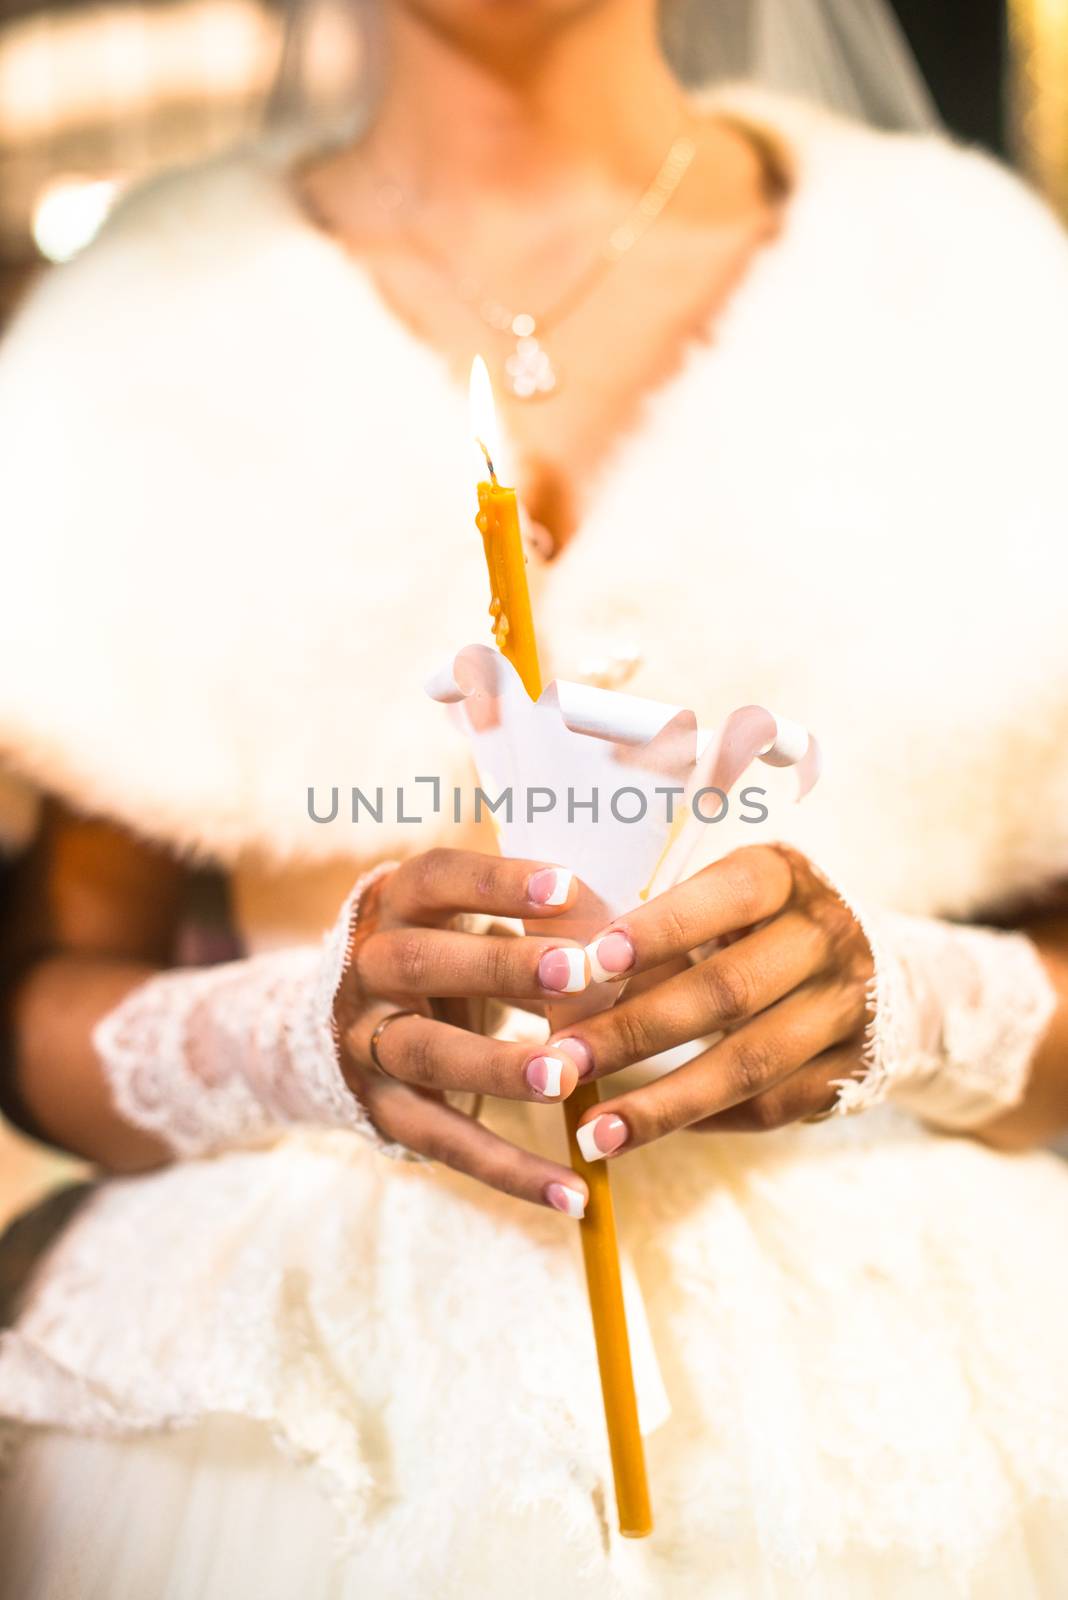 Bride holding the candle during the wedding ceremony in orthodox church. Close up.